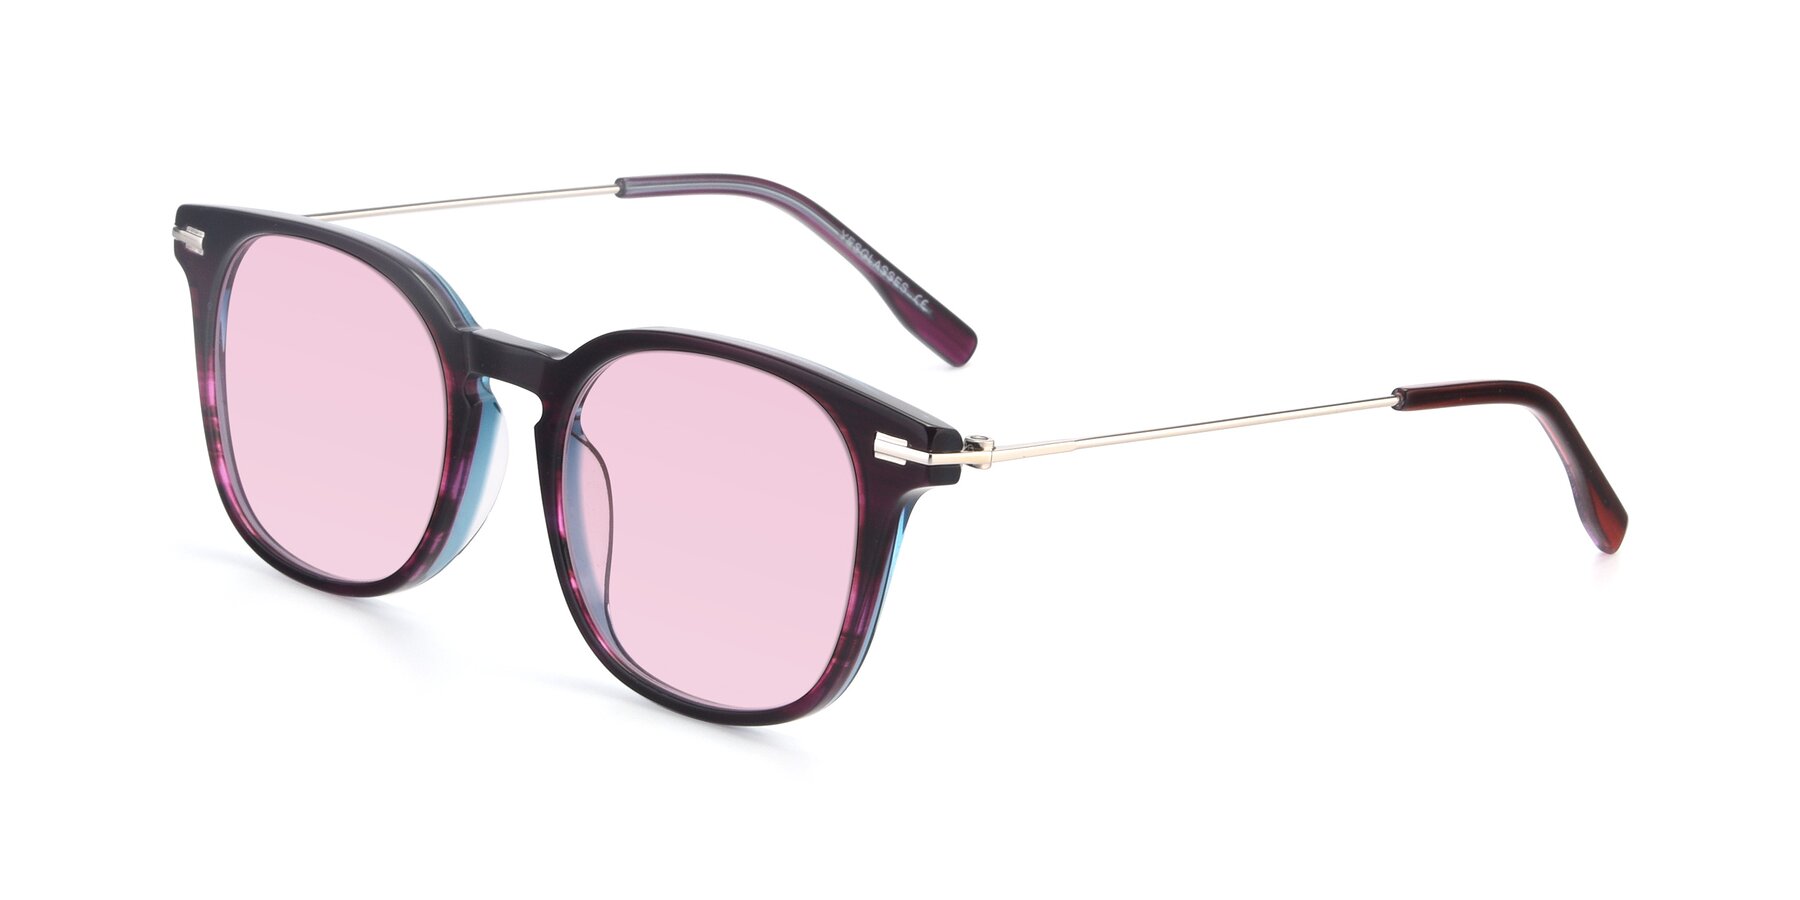 Angle of 17711 in Dark Purple with Light Pink Tinted Lenses